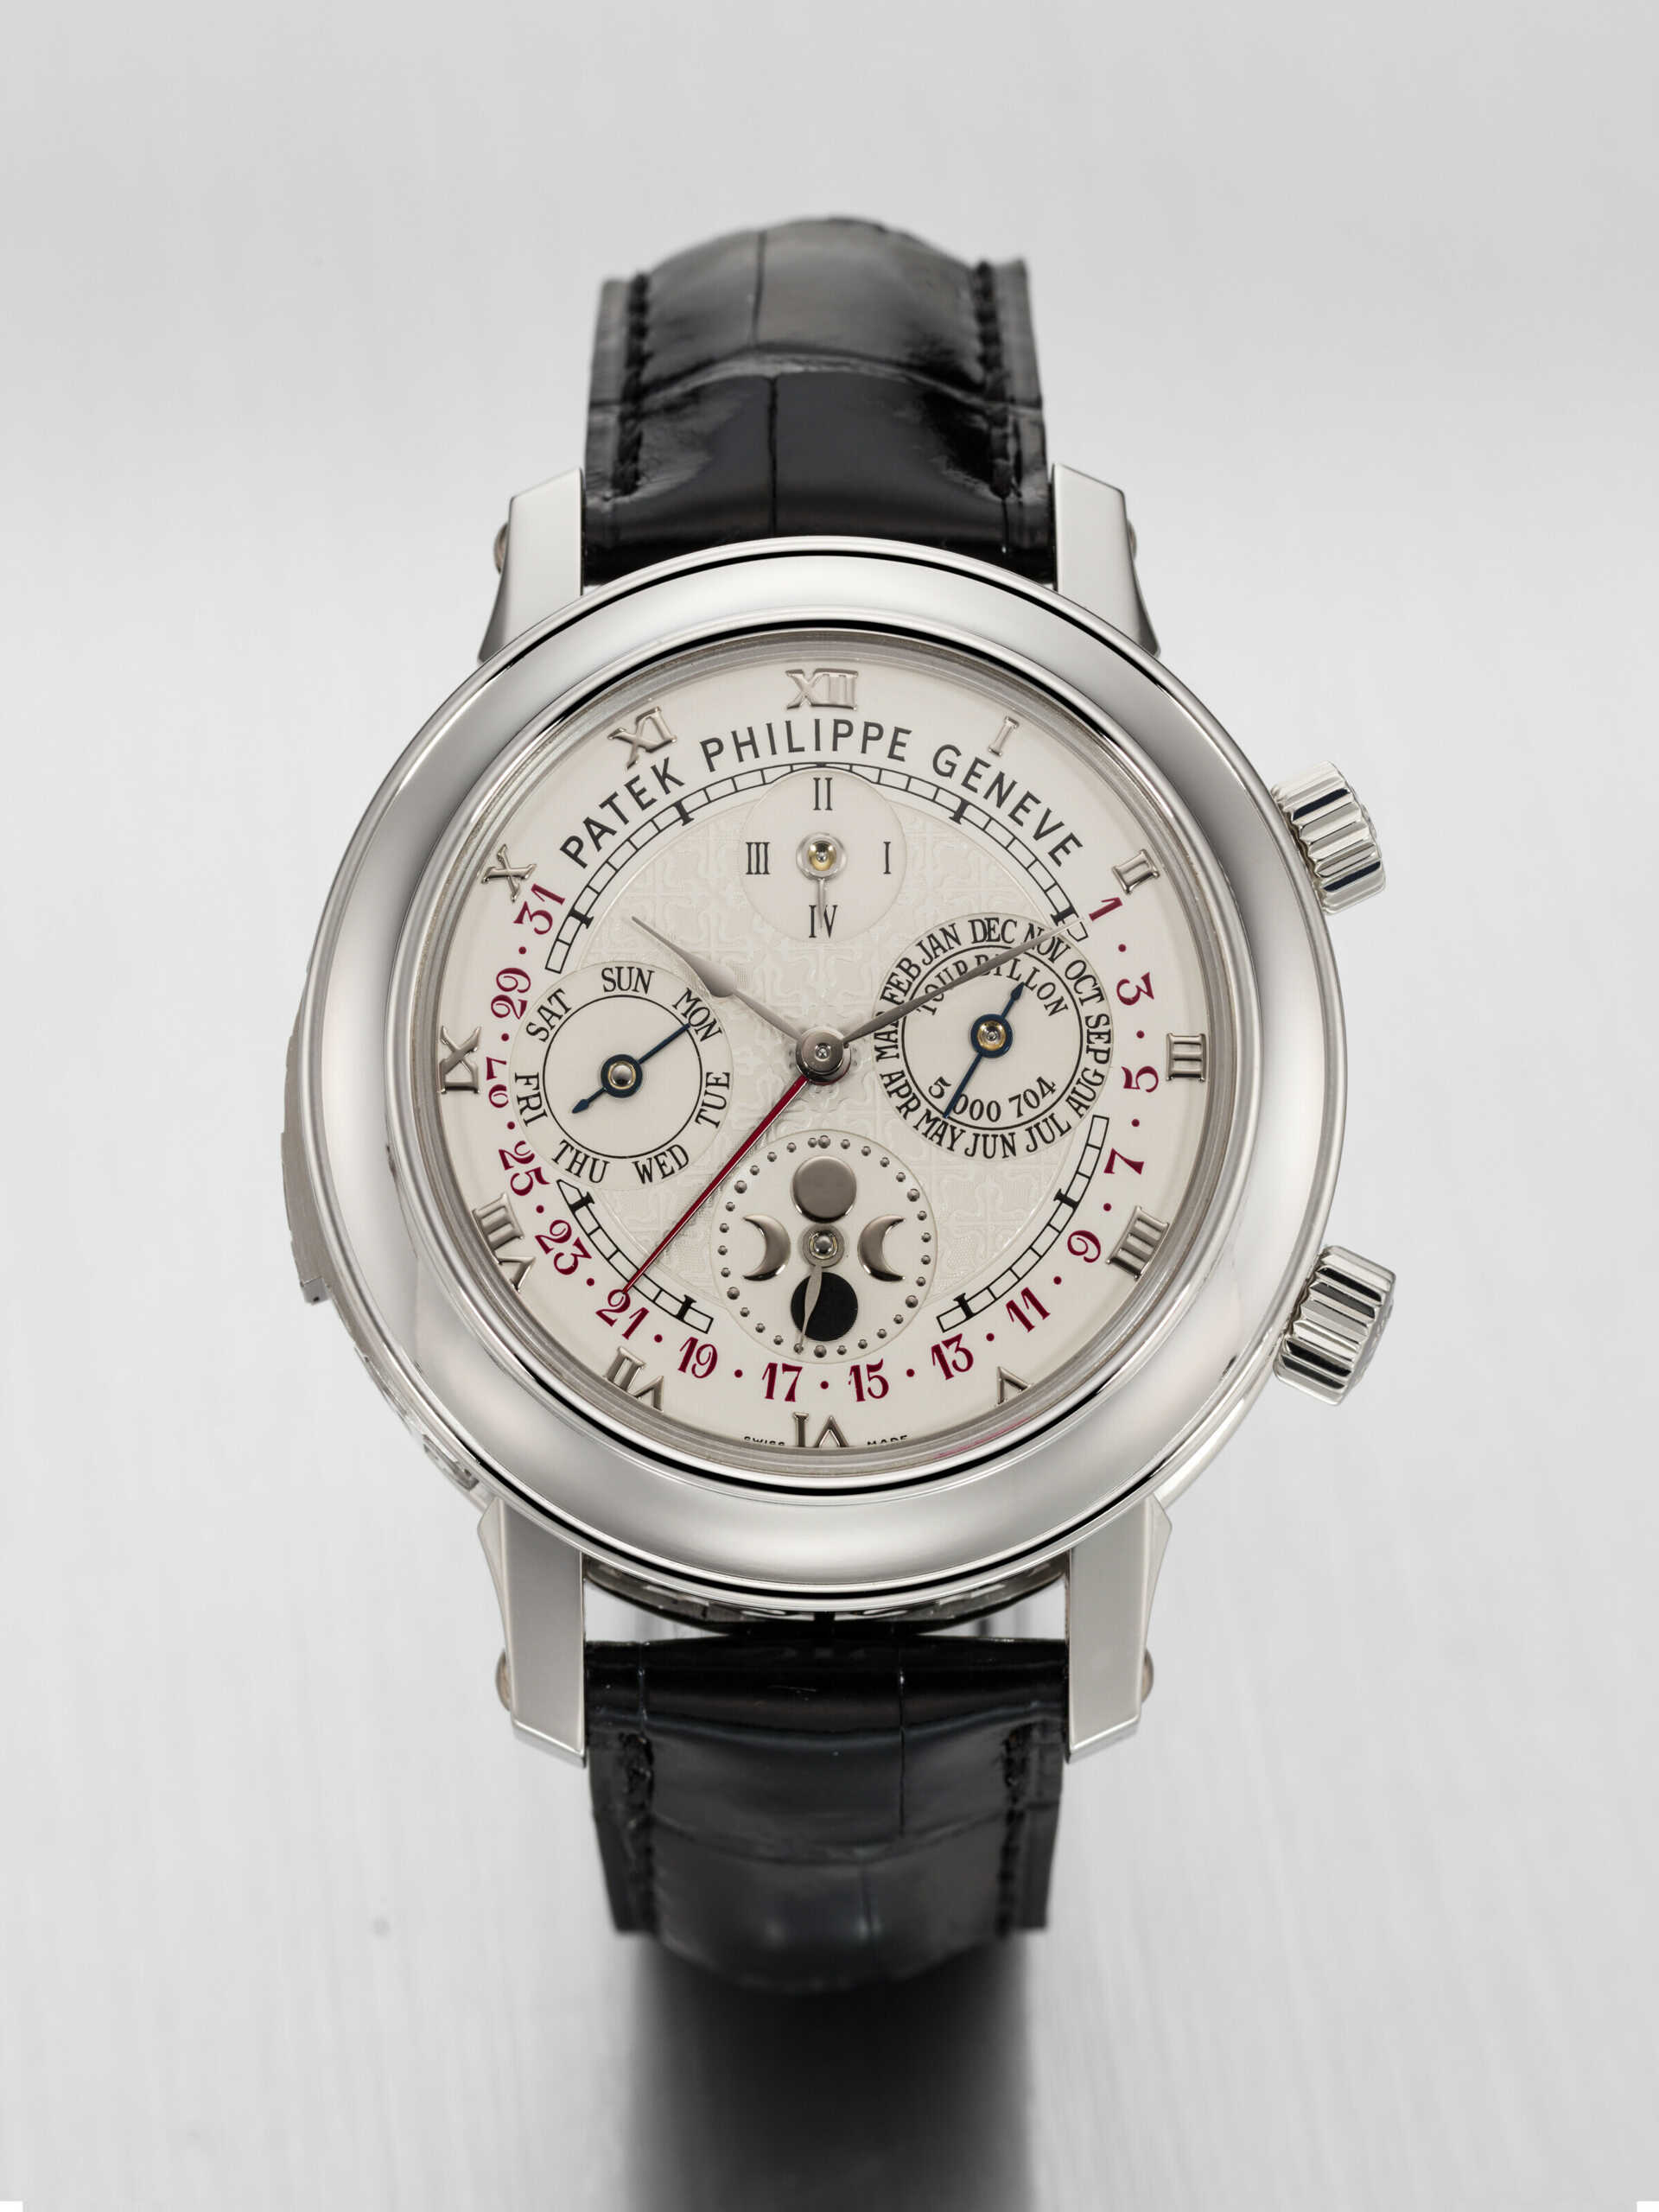 PATEK PHILIPPE. A MAGNIFICENT AND EXTREMELY RARE PLATINUM DOUBLE-DIAL WRISTWATCH WITH TWELVE COMPLICATIONS INCLUDING &#39;CATHEDRAL&#39; MINUTE REPEATING TOURBILLON, PERPERTUAL CALENDAR WITH RETROGRADE DATE, MOON AGE AND ANGULAR MOTION, SIDEREAL TIME AND 